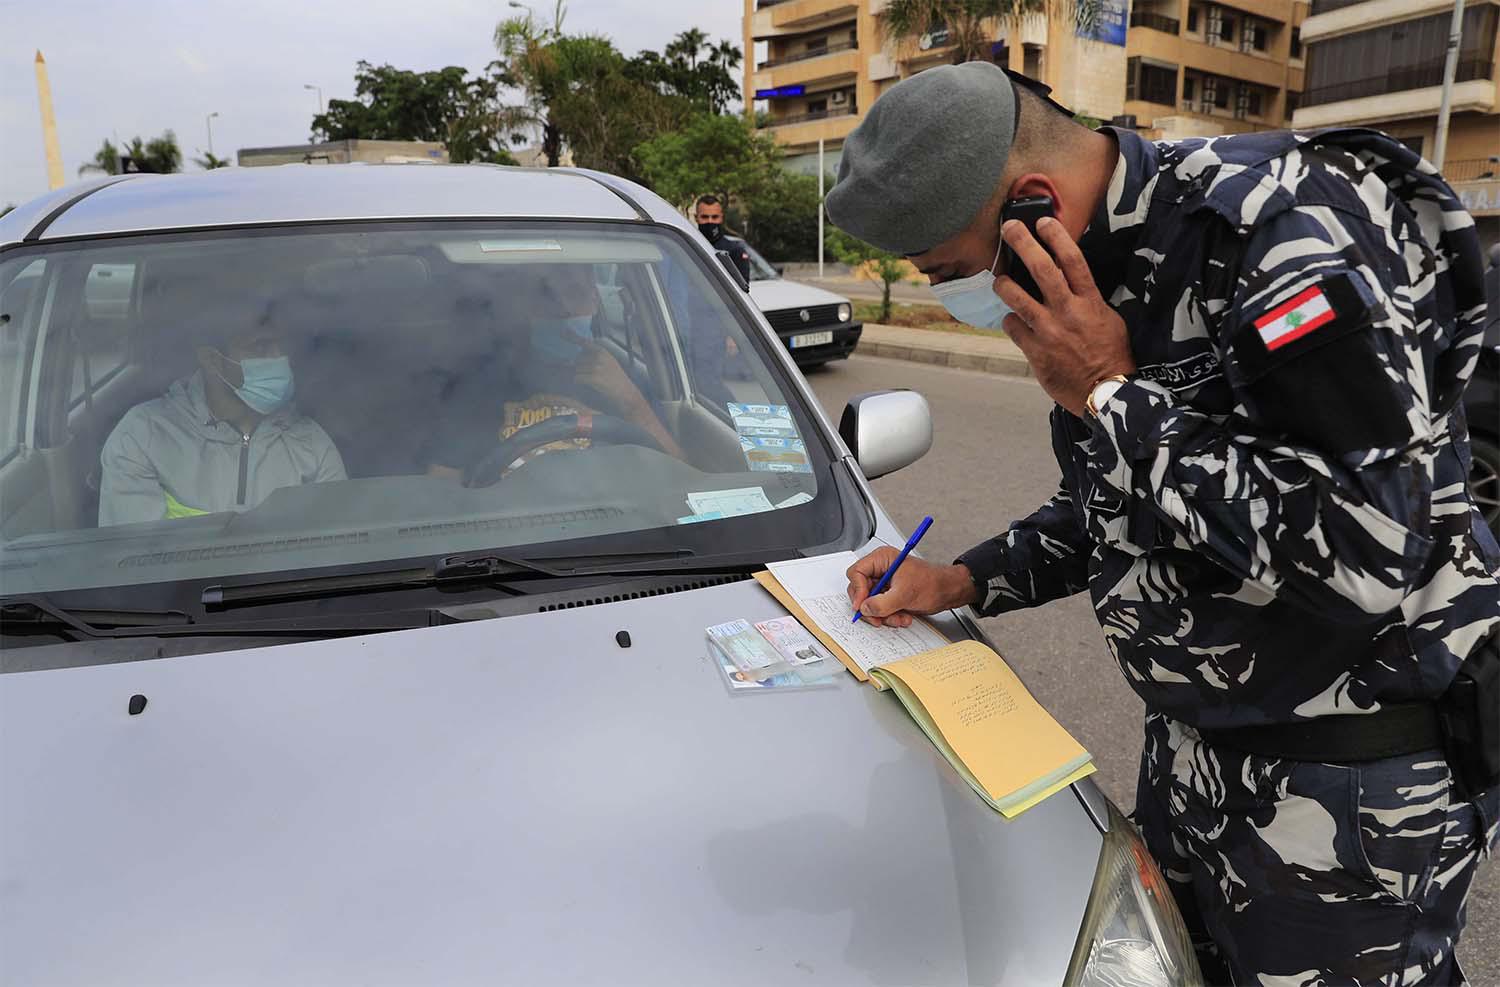 The lockdown comes after the number cases increased sharply in recent weeks around Lebanon